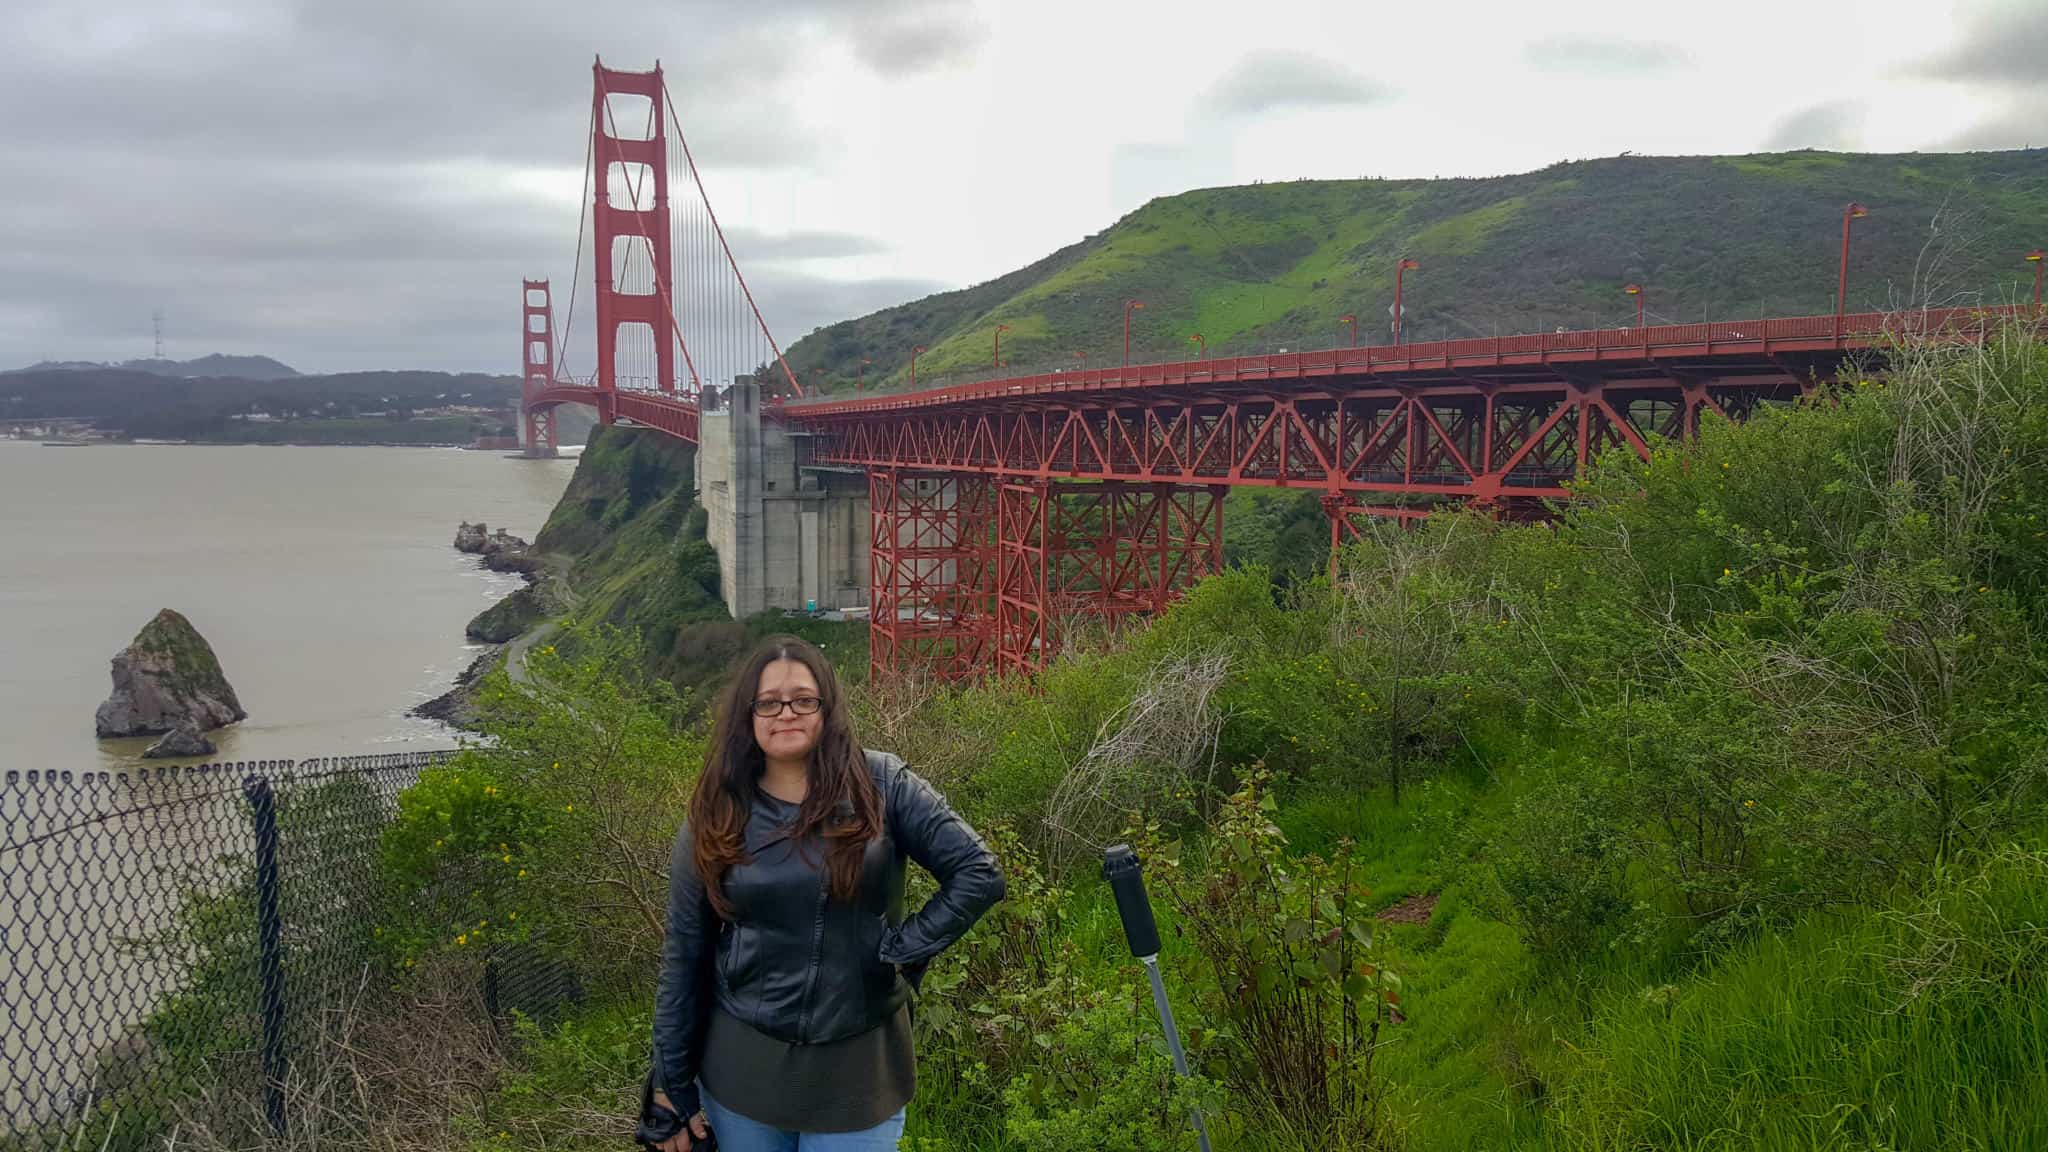 Seeing the Golden Gate Bridge is an absolute must during your 2 days in San Francisco